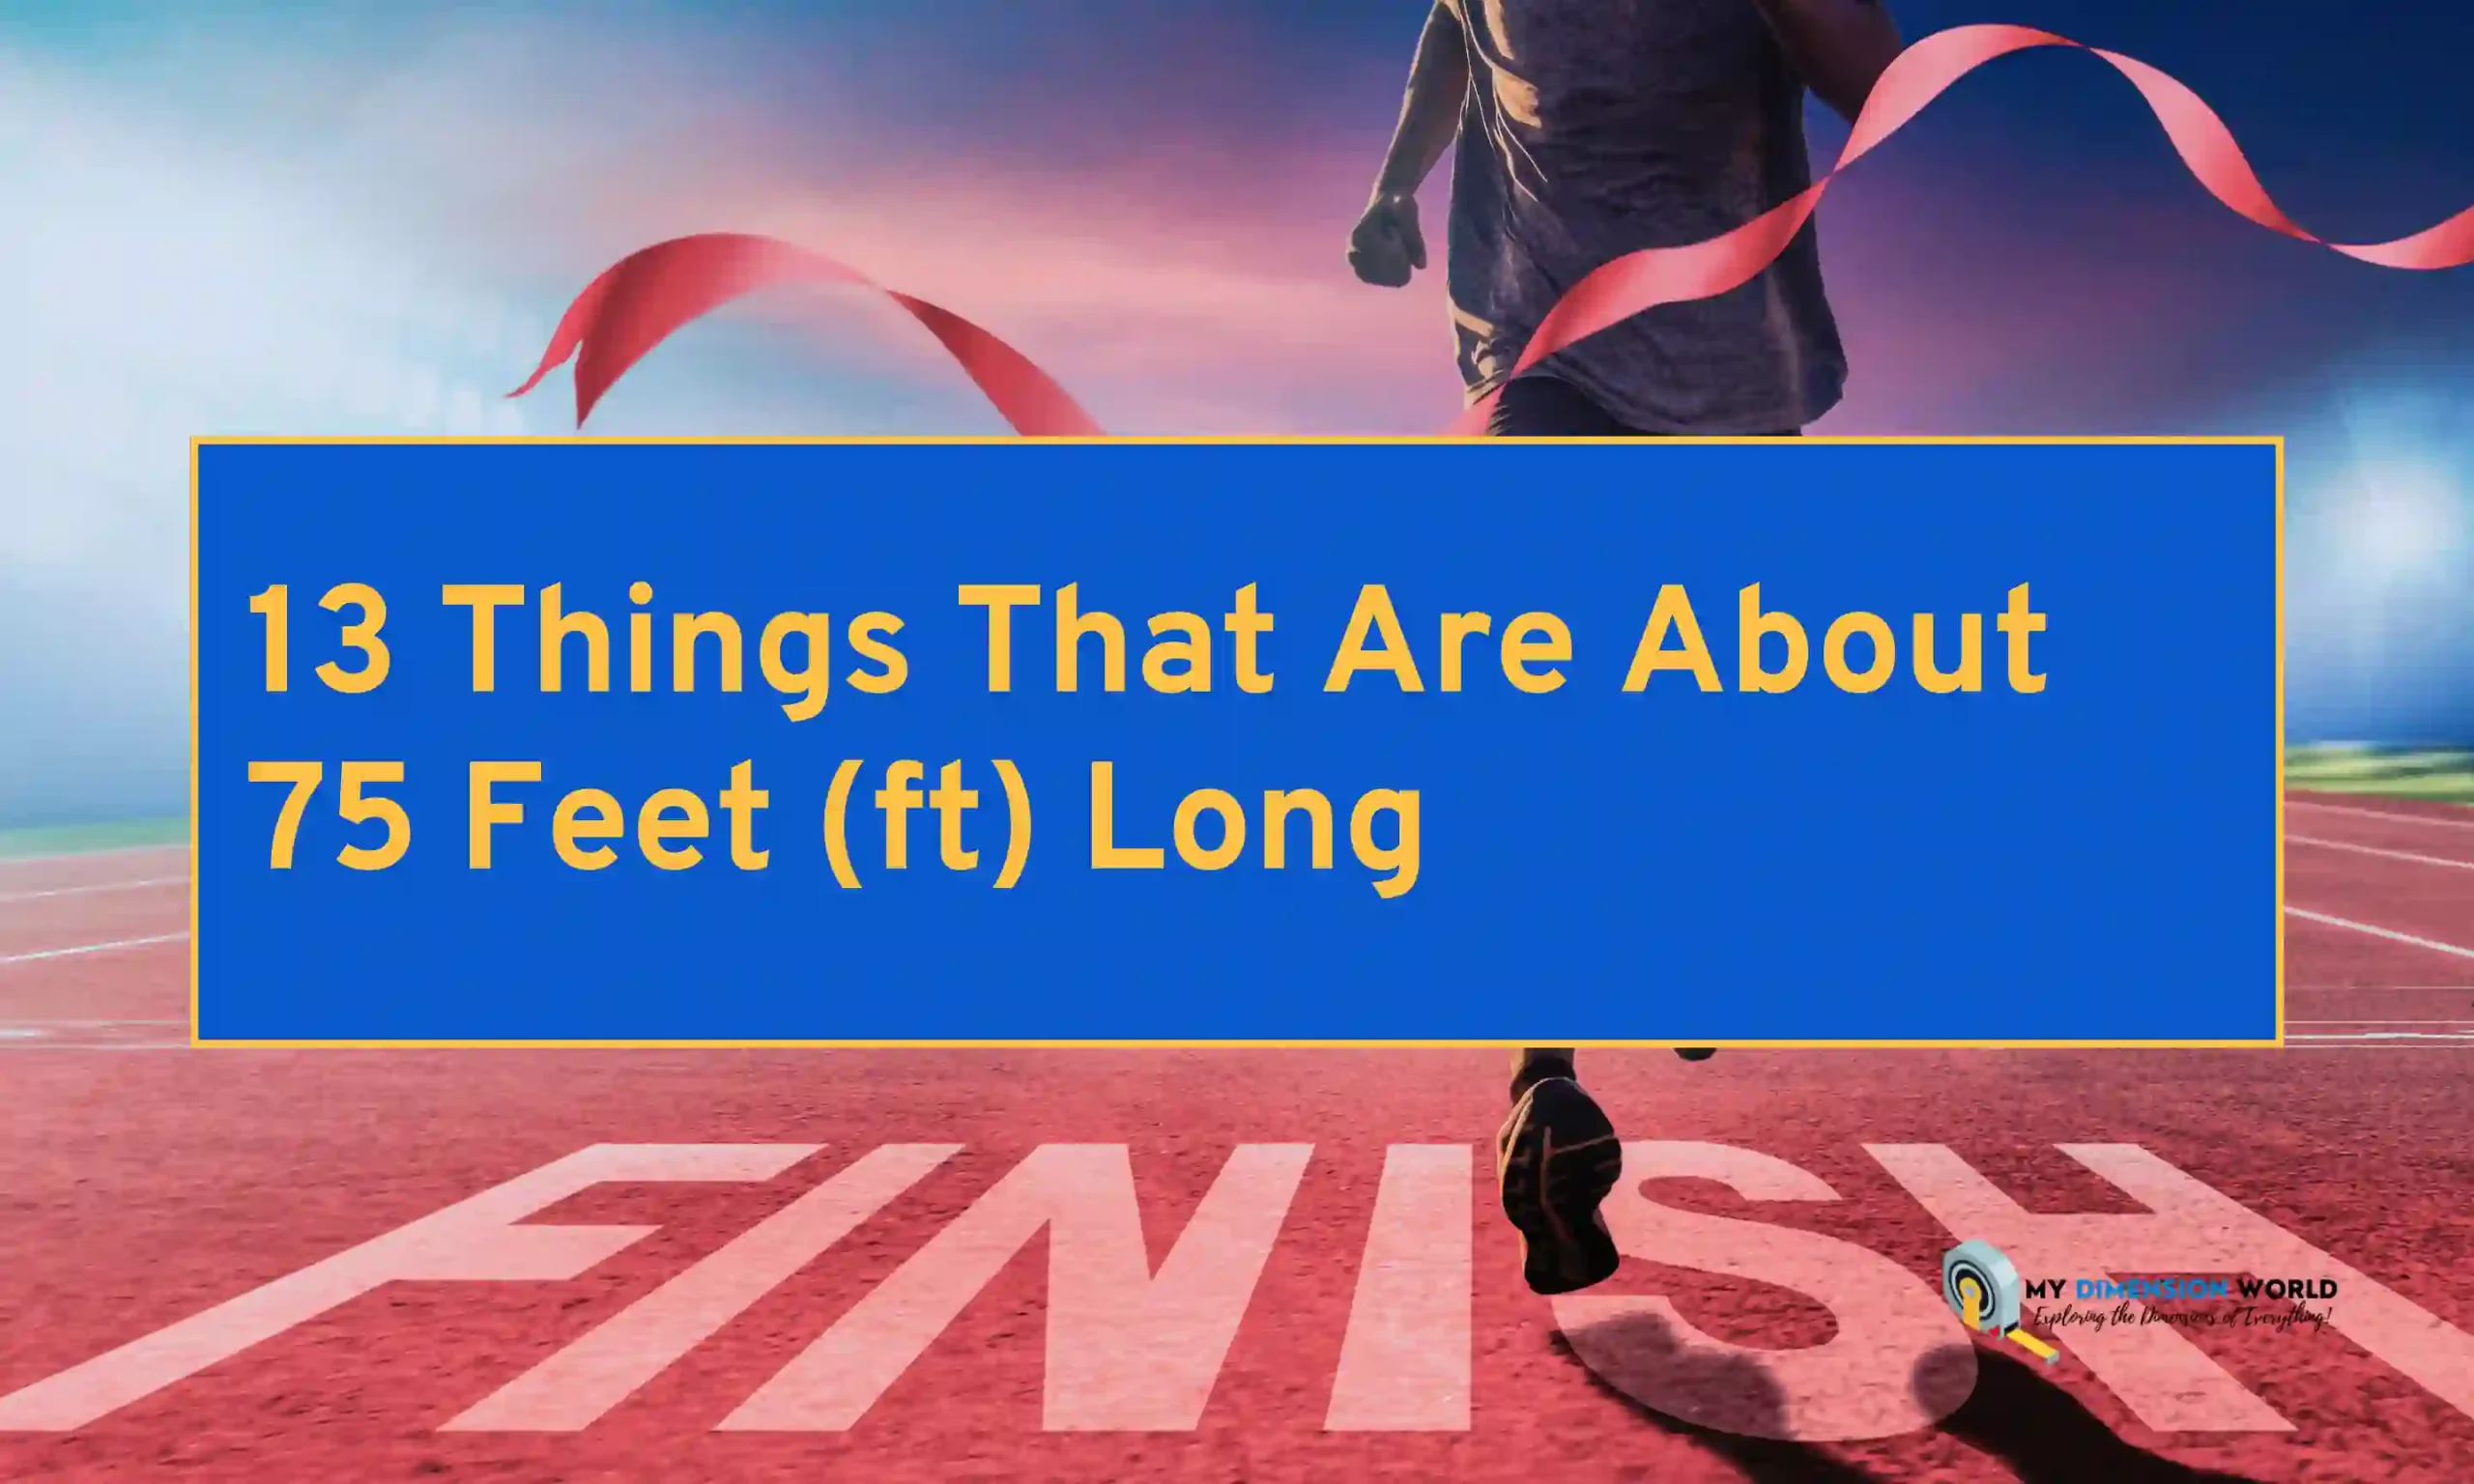 13 Things That Are About 75 Feet (ft) Long